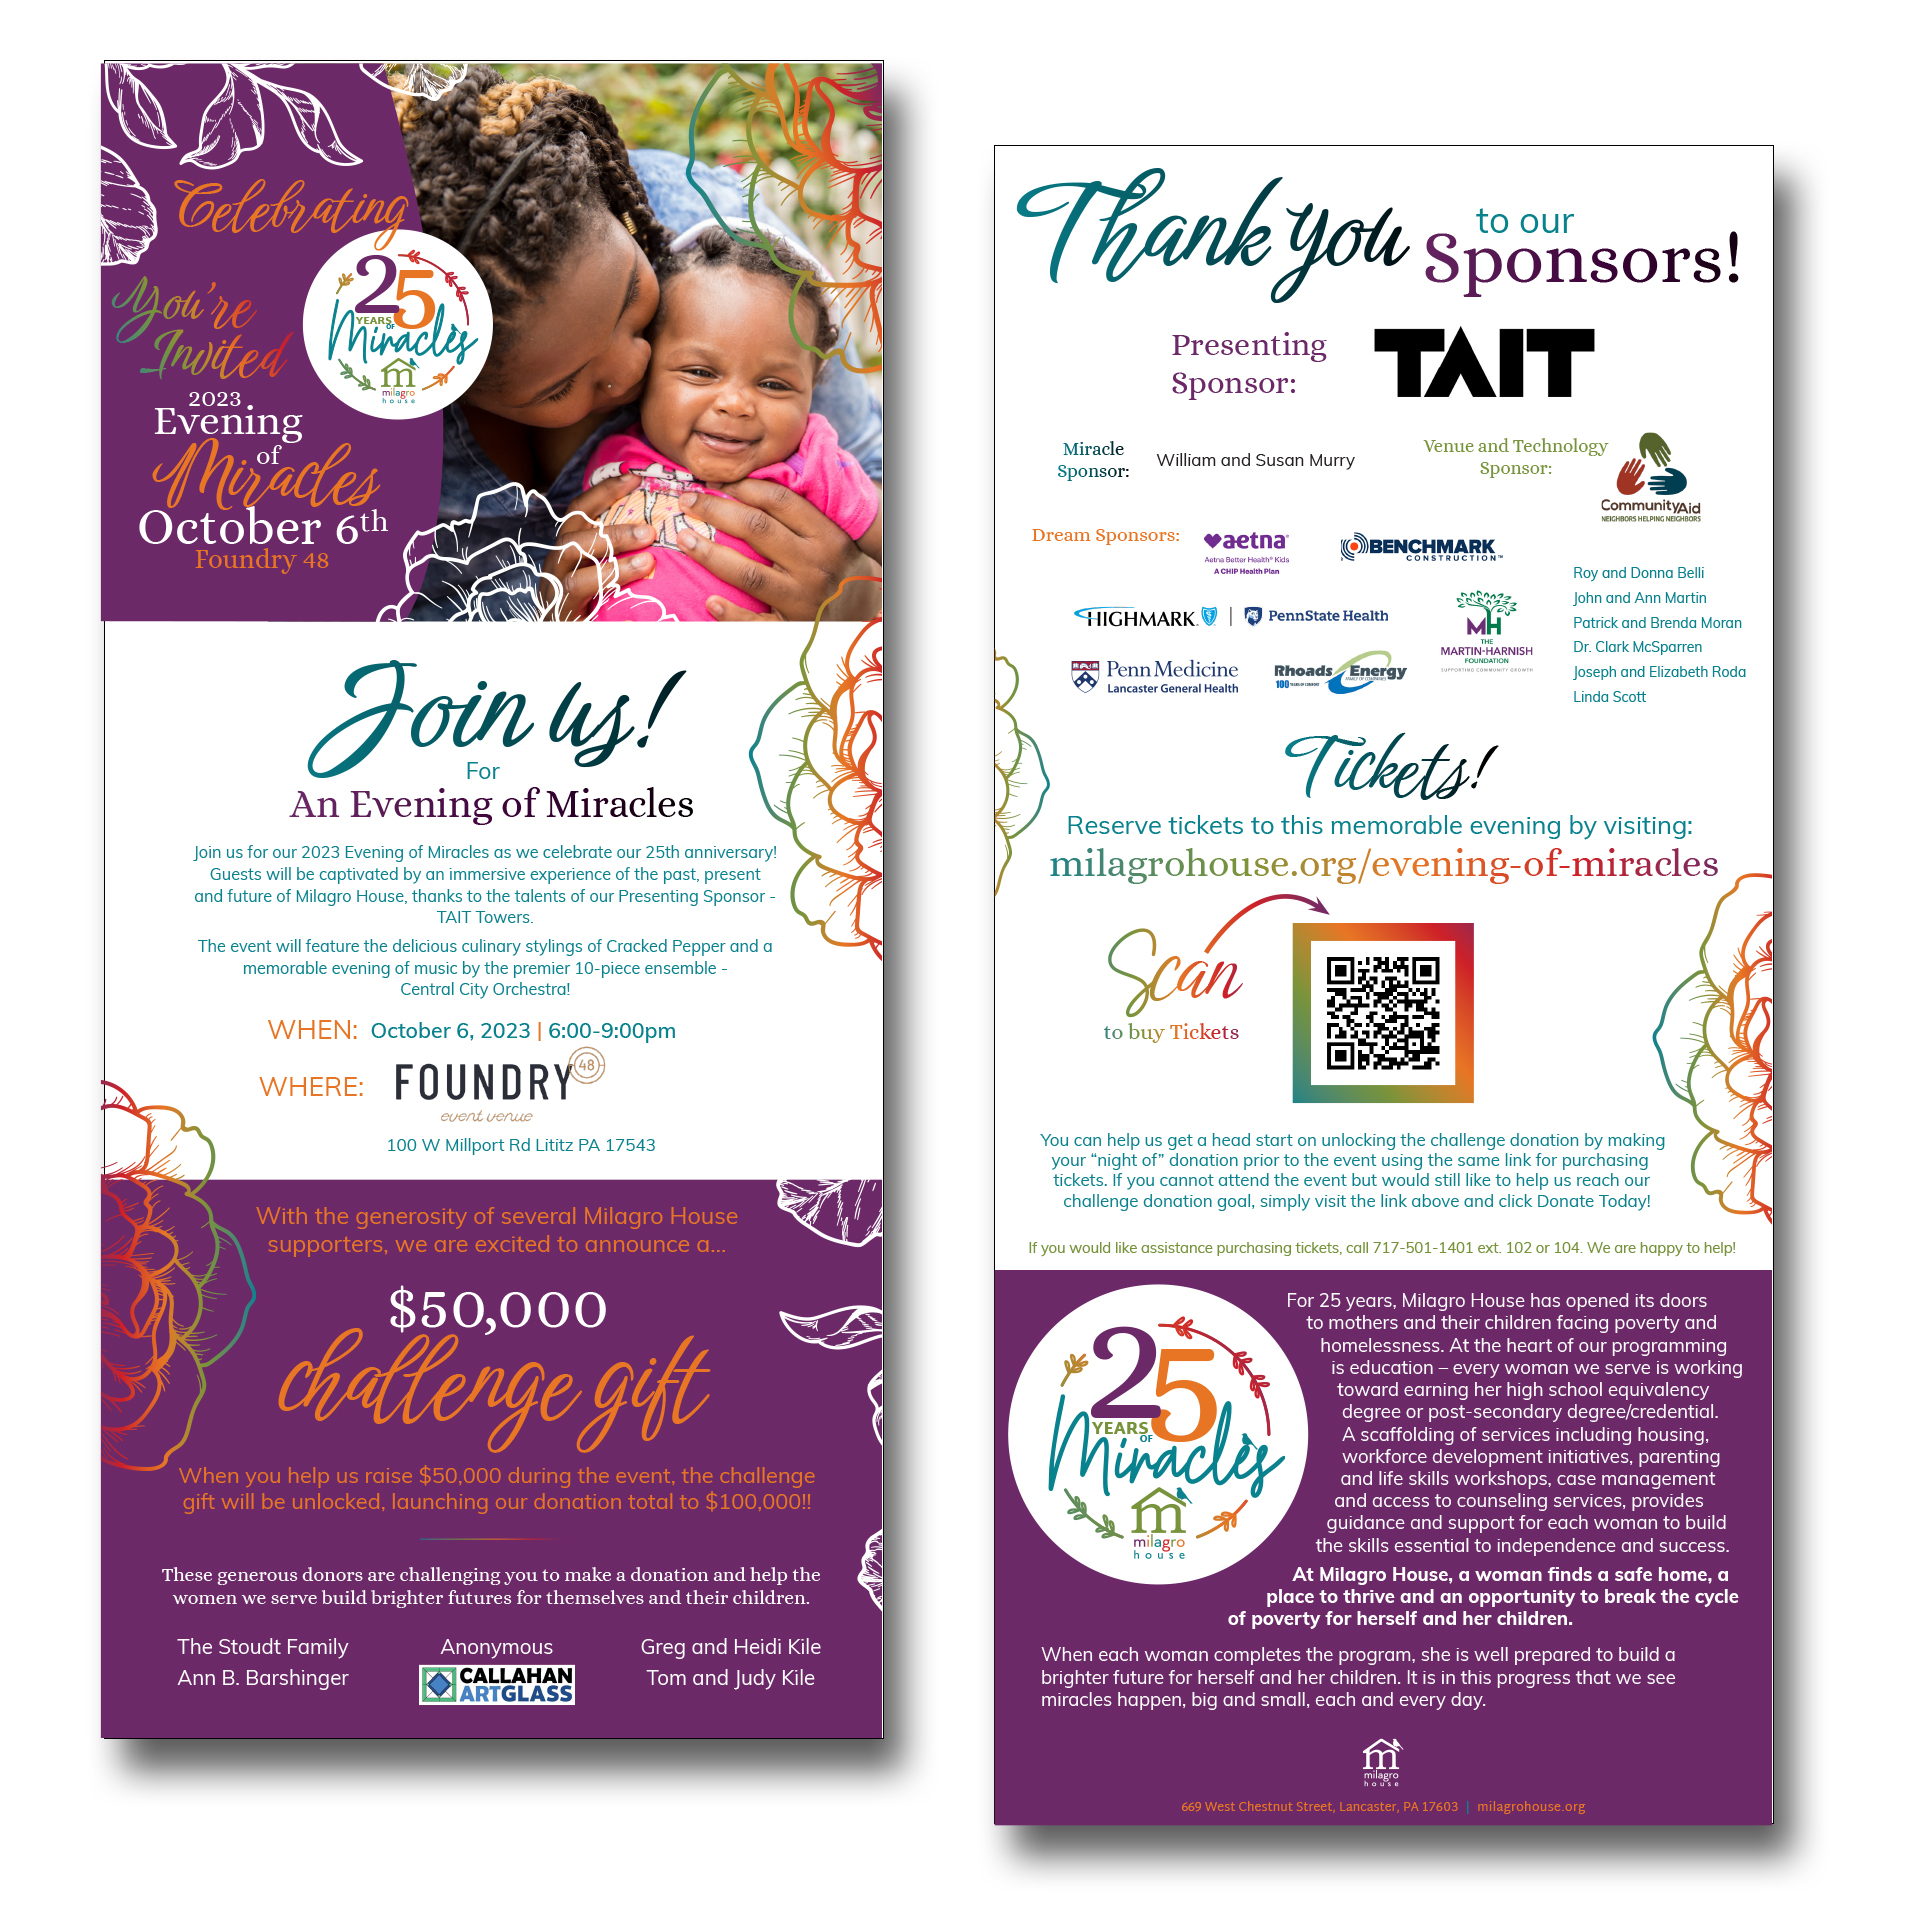 Evening of Miracles Milagro House Invitation Design for Large Event Gala in Lancaster, PA hosted at the Fulton